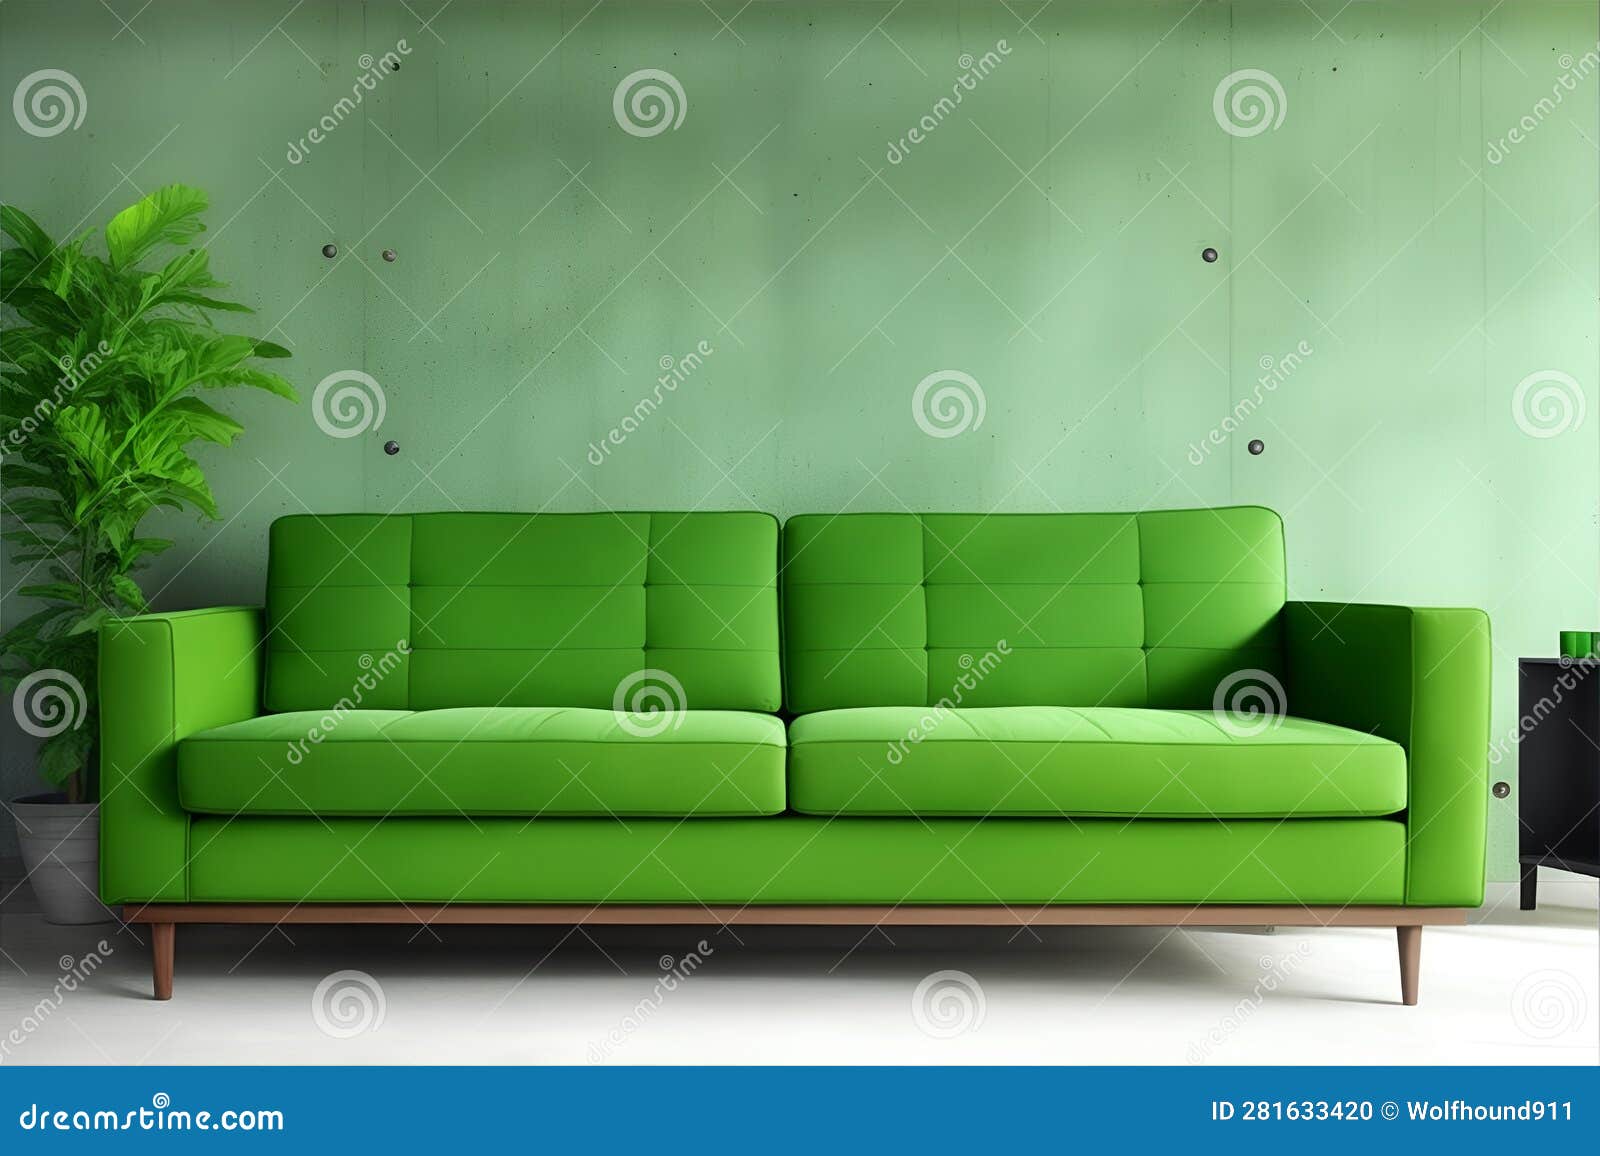 Living Room with Green Sofa and Decoration Room on Empty Concrete Wall ...